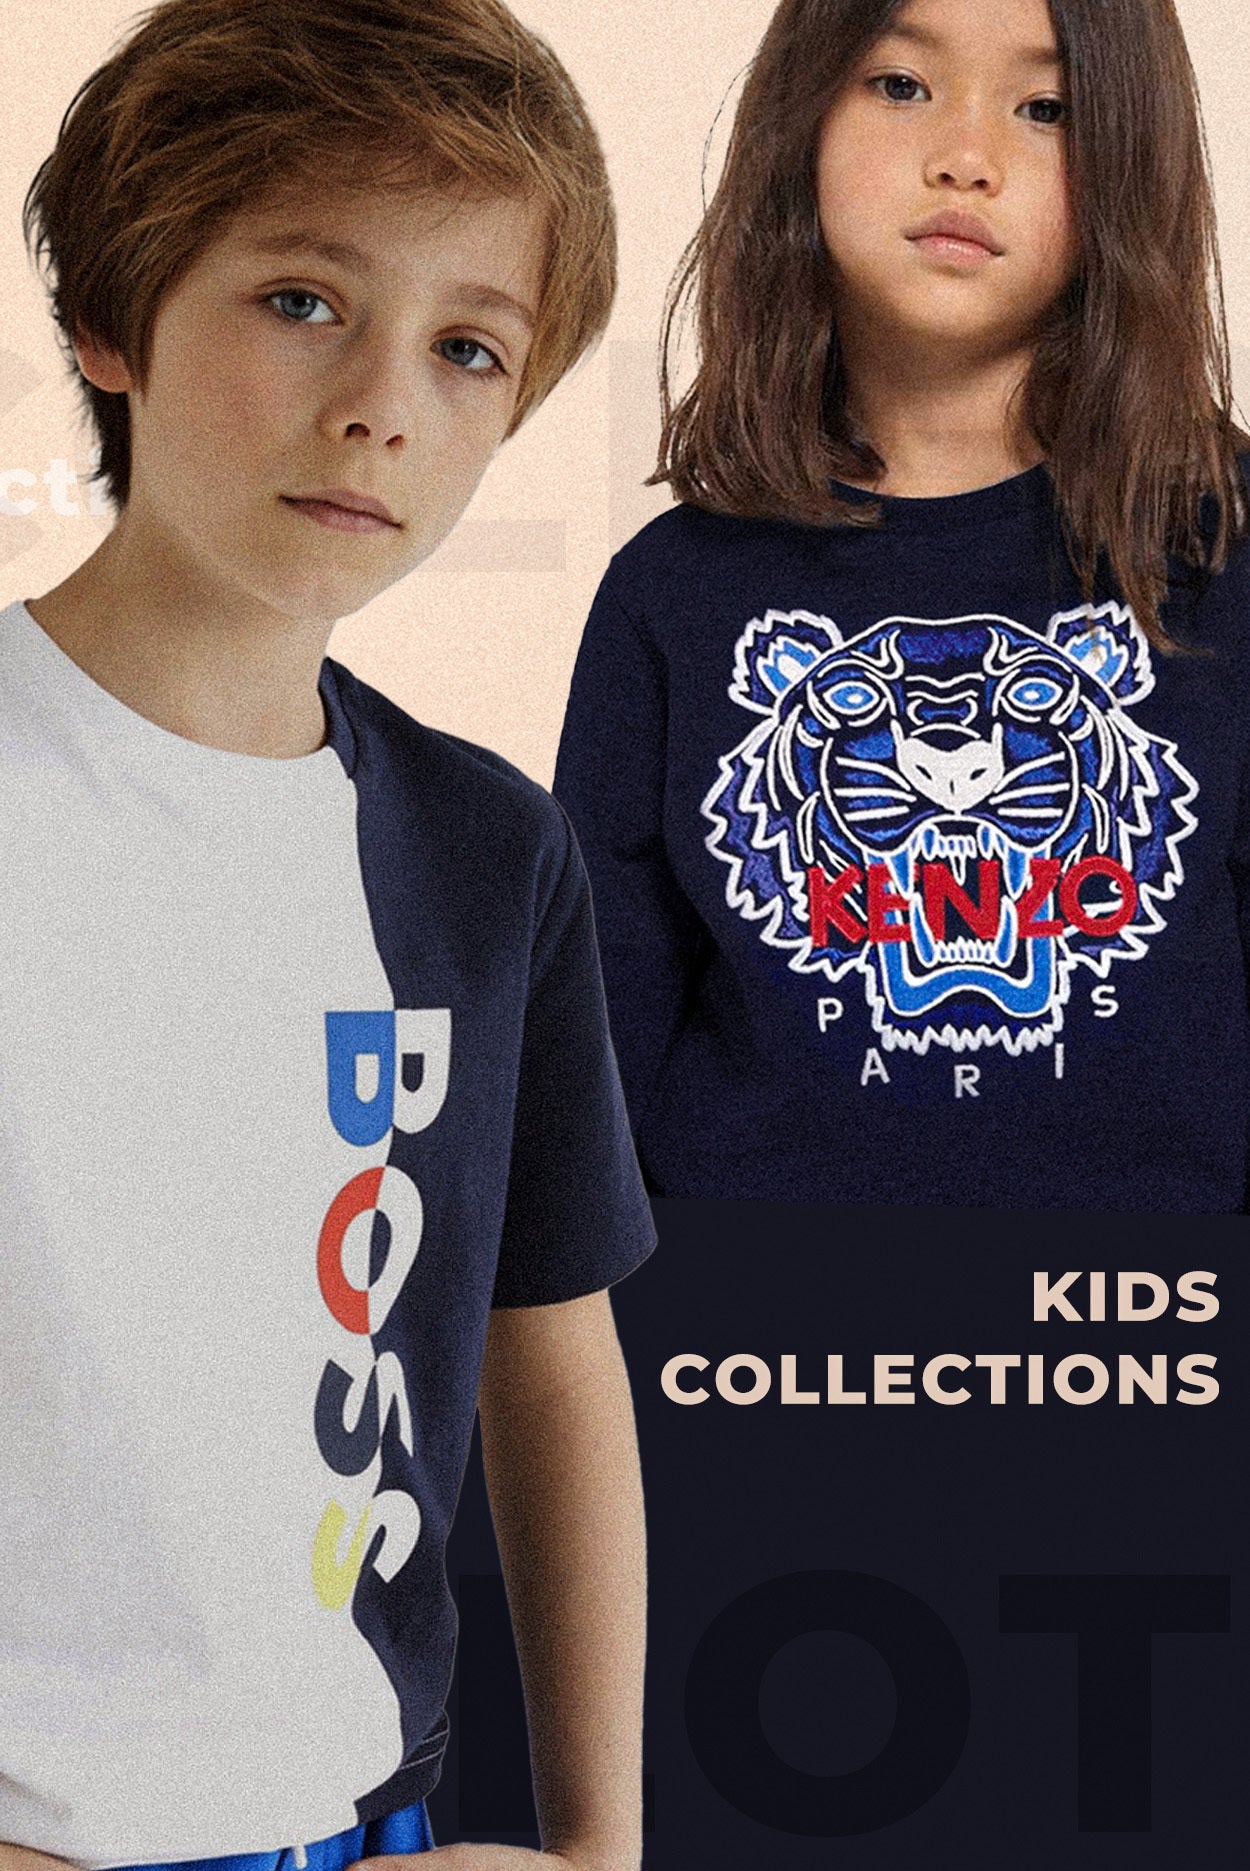 Tops and Bottoms USA kids collections